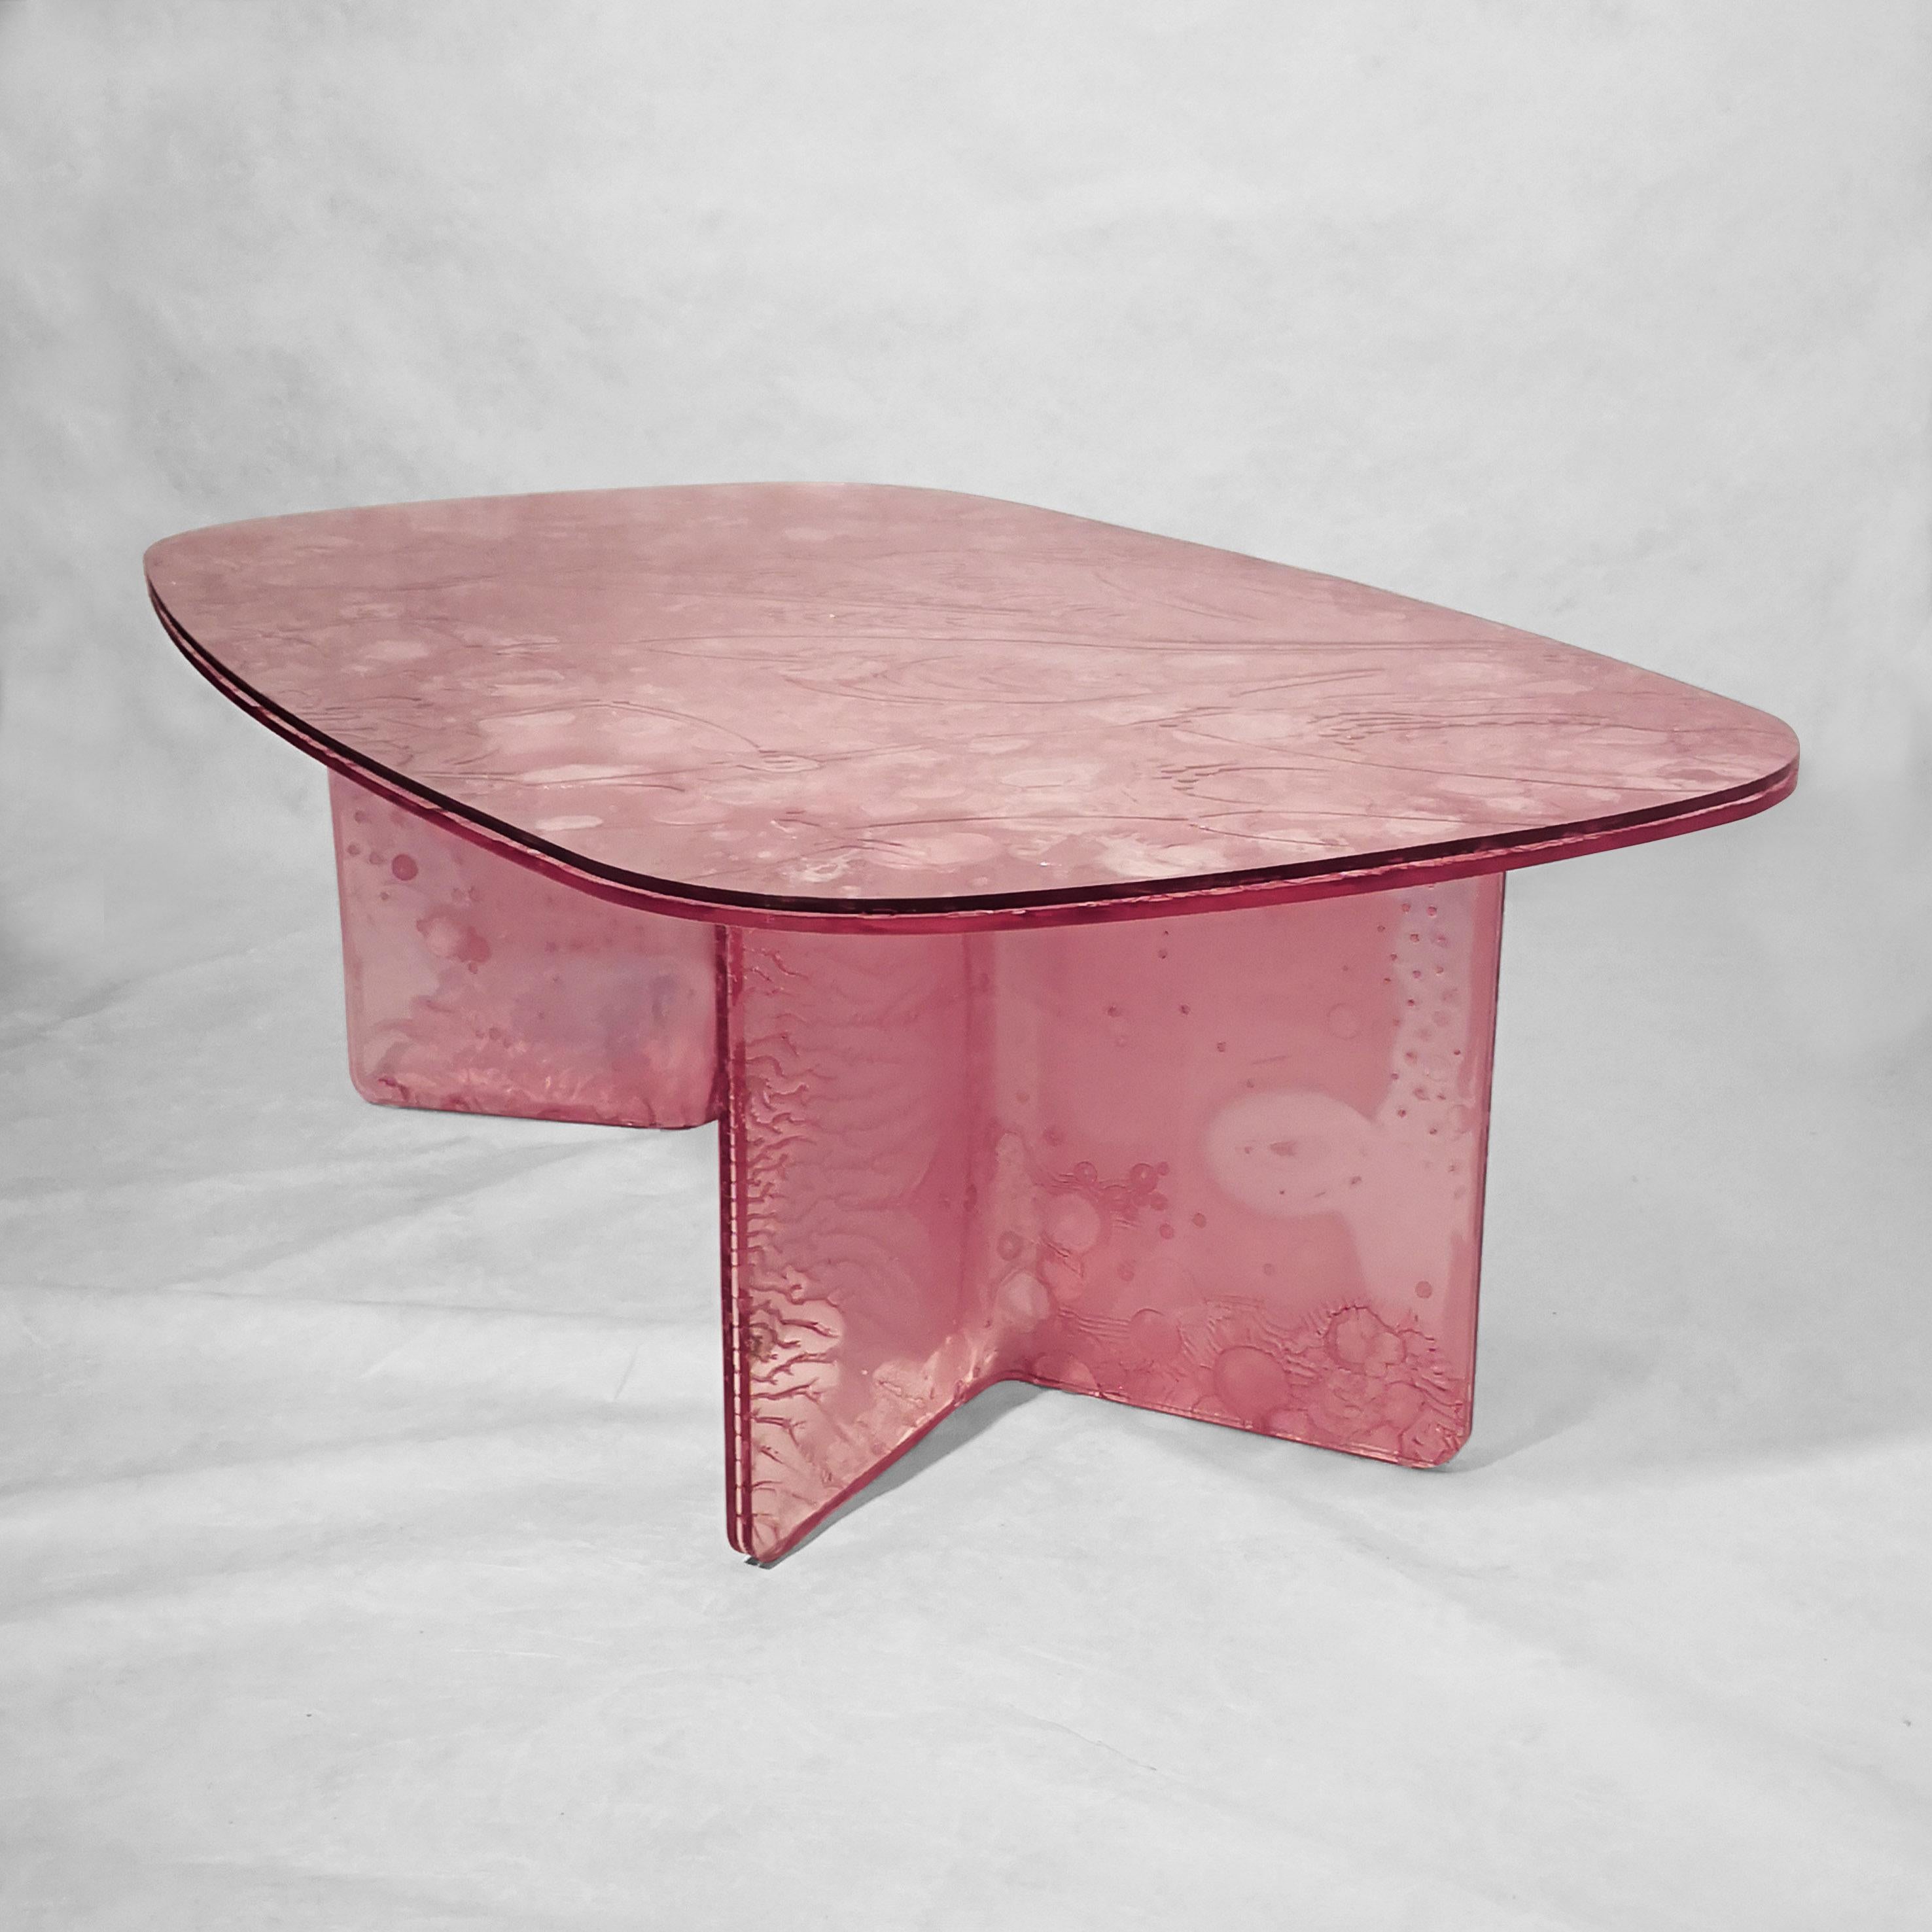 Coffee table, handmade in transparent pink acrylic colored with an innovative technology.
The material is made through the fusion of three plates, one of which
partially cured center.
This process creates unique and particular effects,